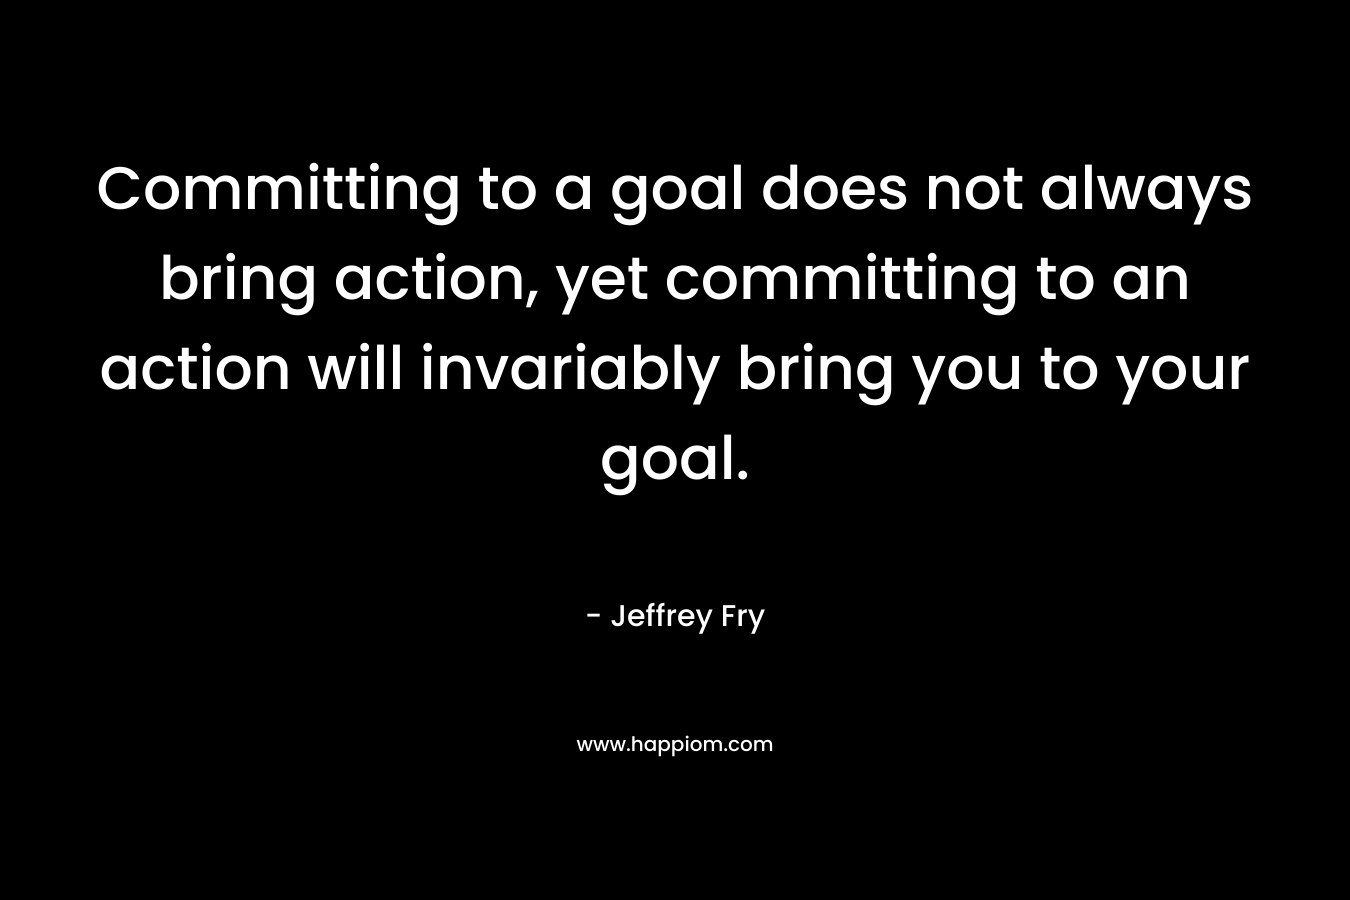 Committing to a goal does not always bring action, yet committing to an action will invariably bring you to your goal.